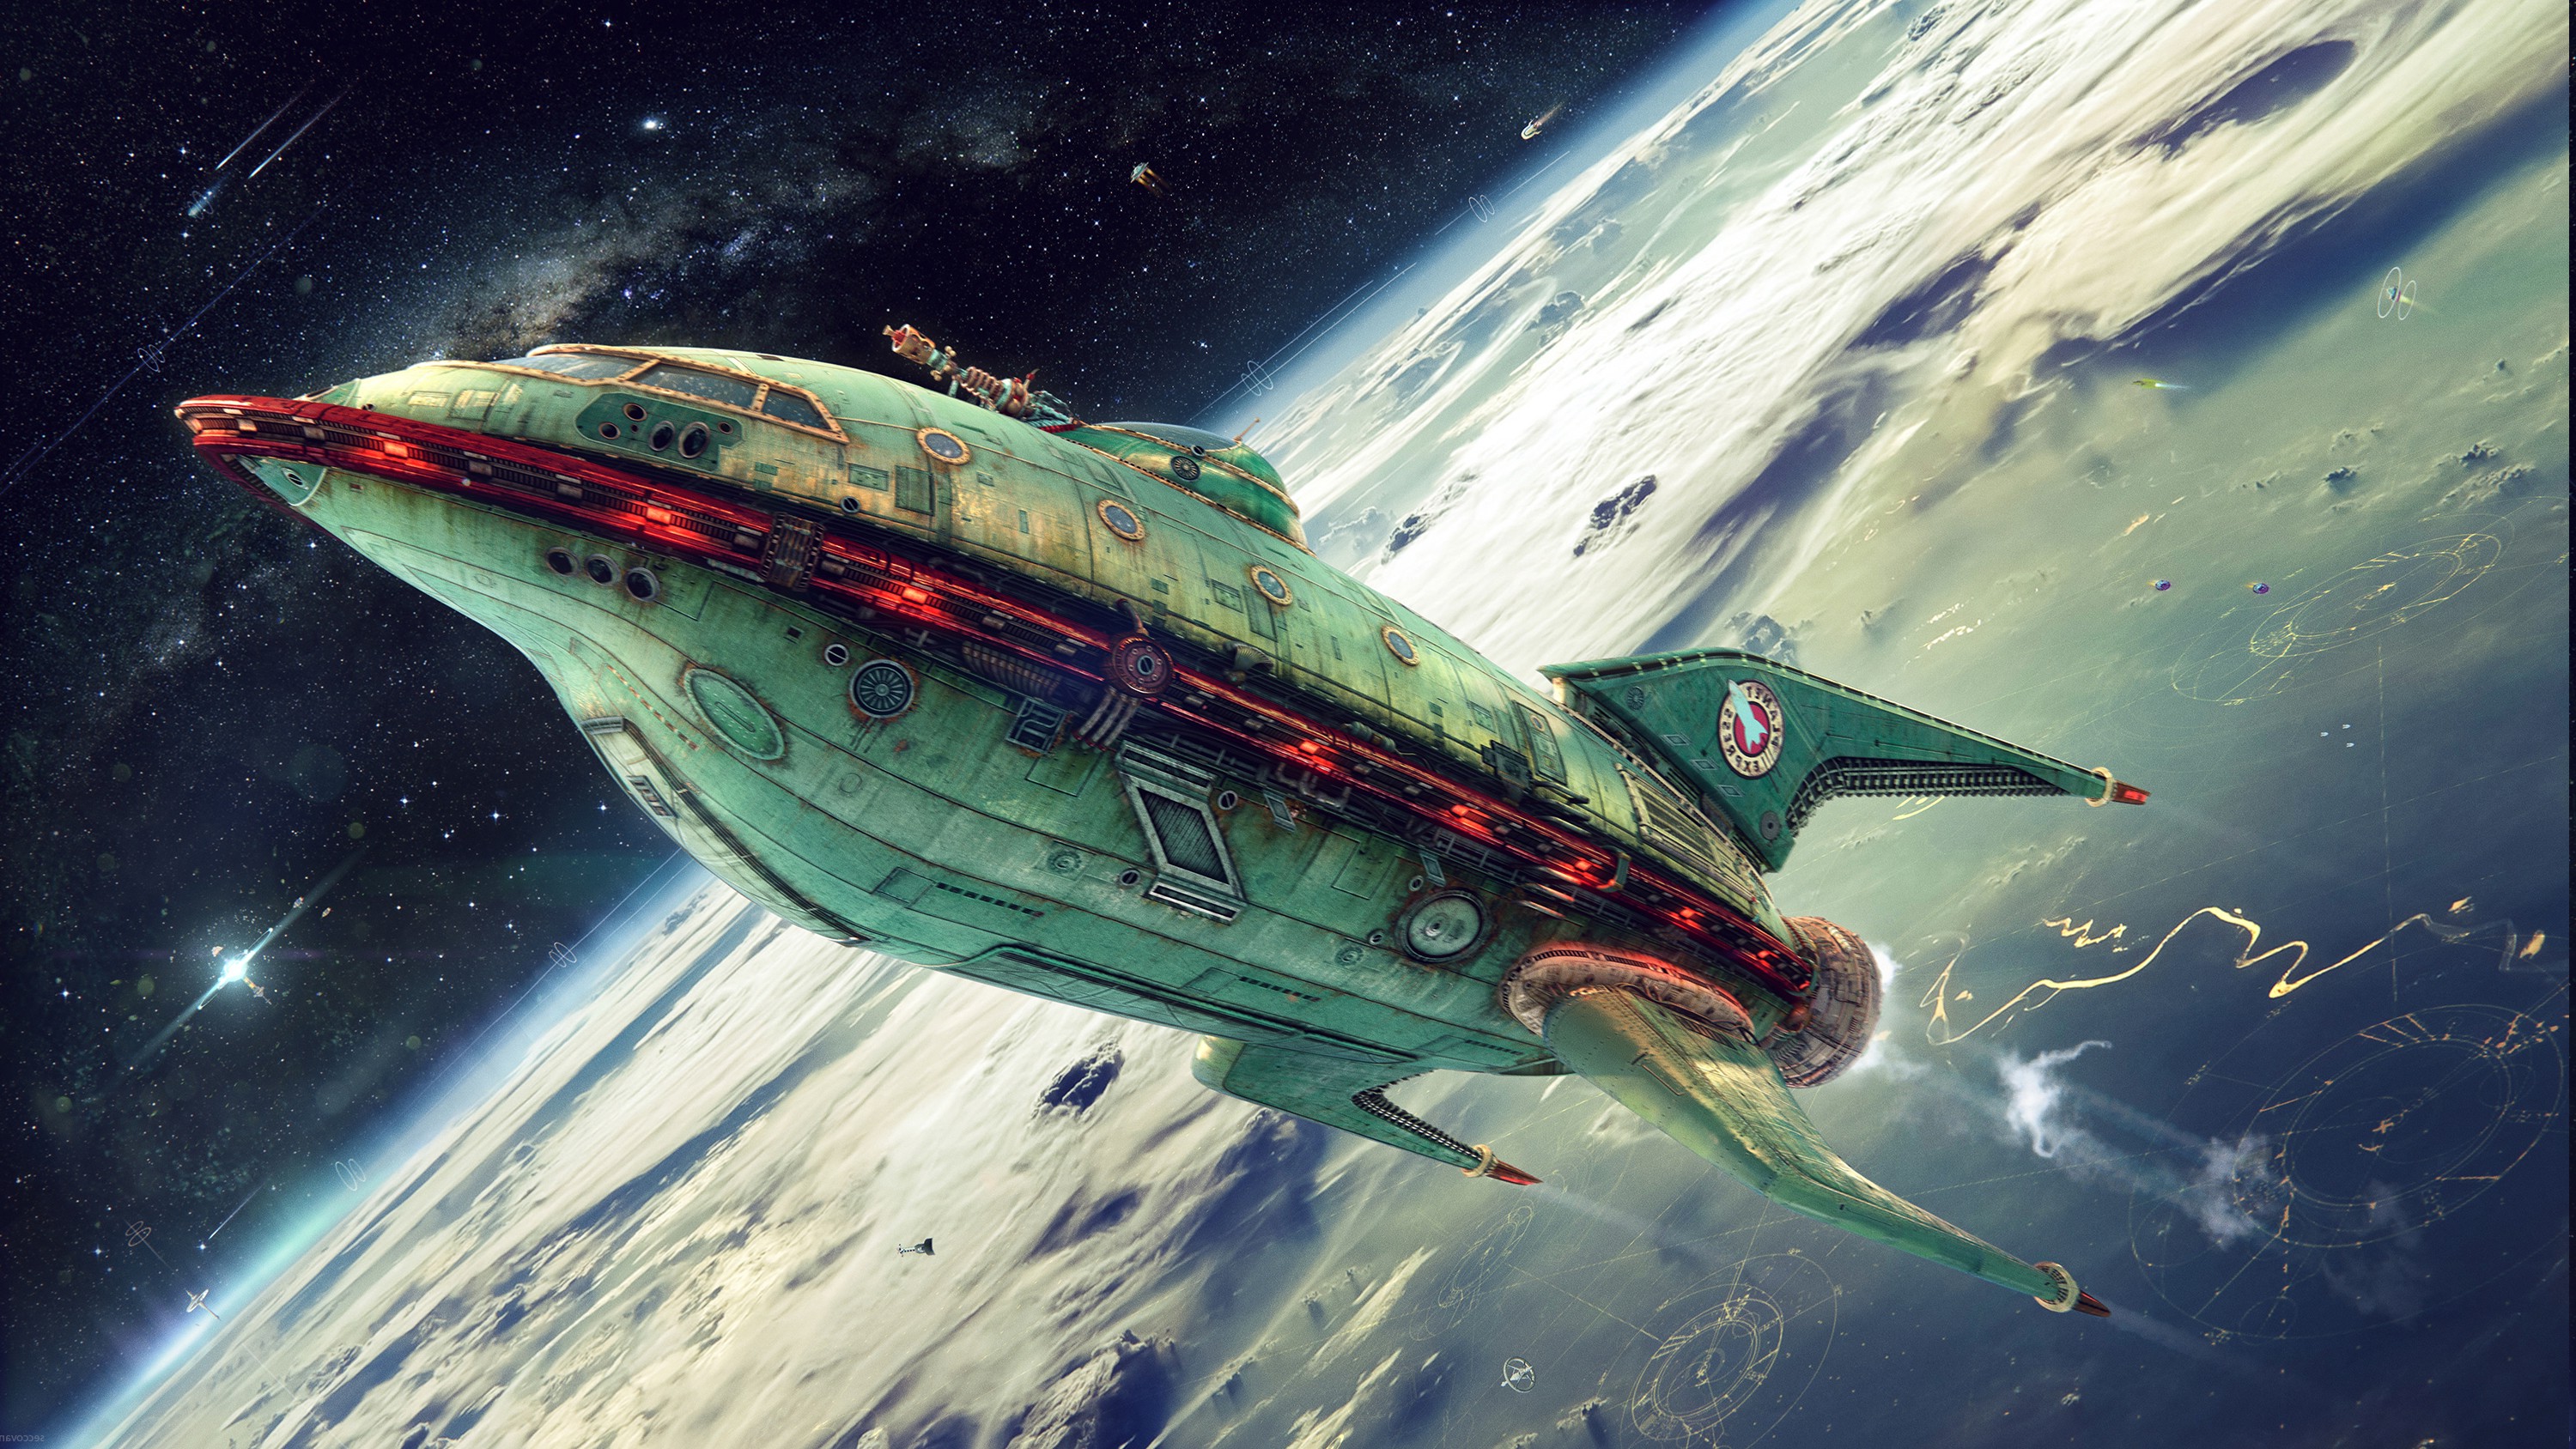 planet express wallpaper,spacecraft,space,vehicle,illustration,outer space